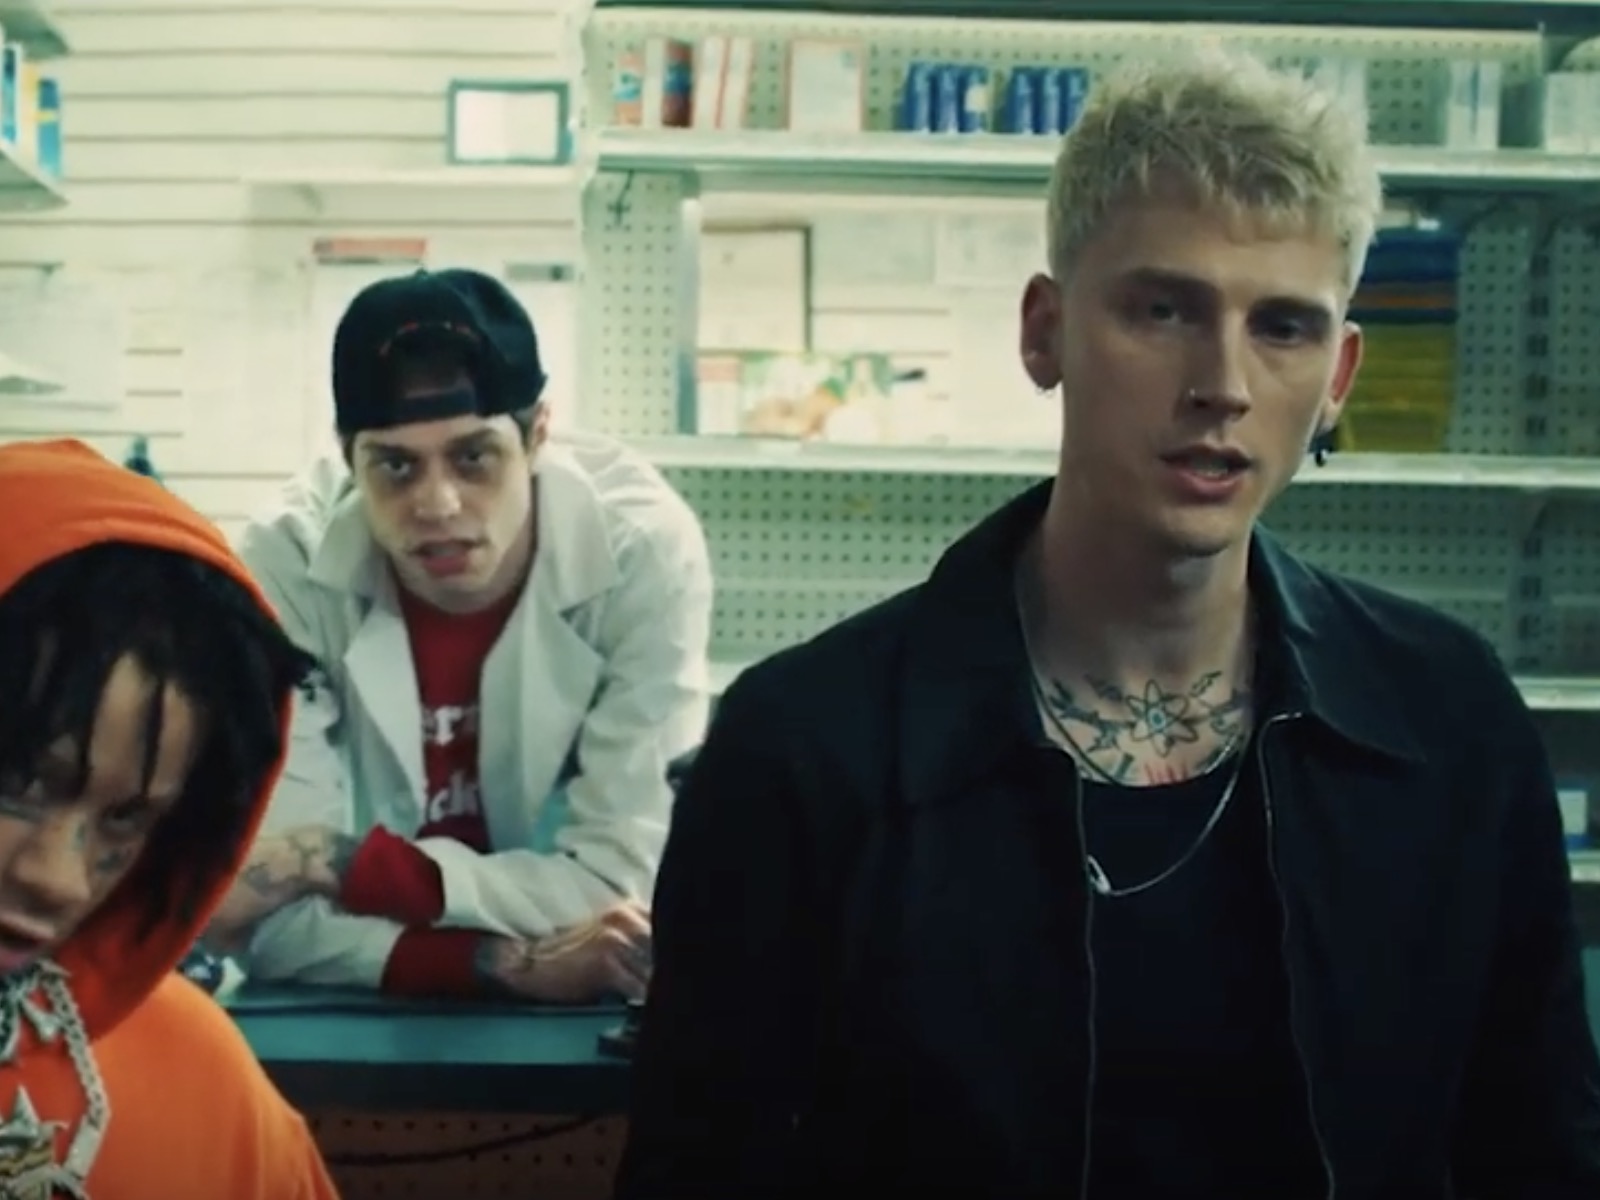 Look: Machine Gun Kelly's CANDY Sparks 2 Mil Views In Less Than 24 Hours - 1600 x 1200